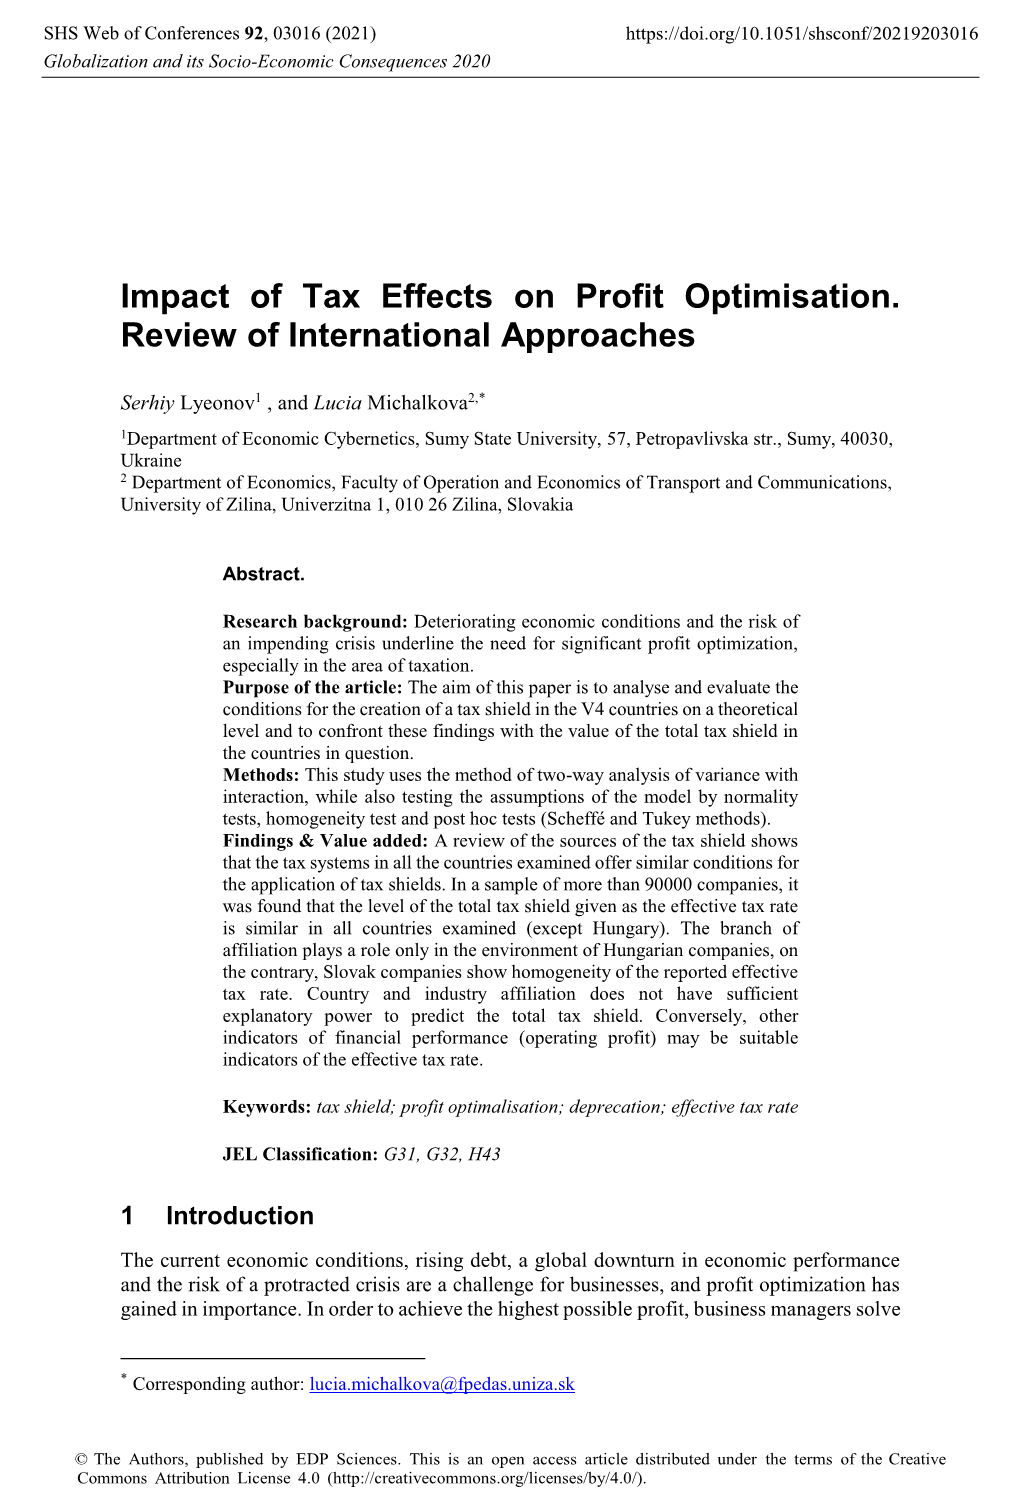 Impact of Tax Effects on Profit Optimisation. Review of International Approaches